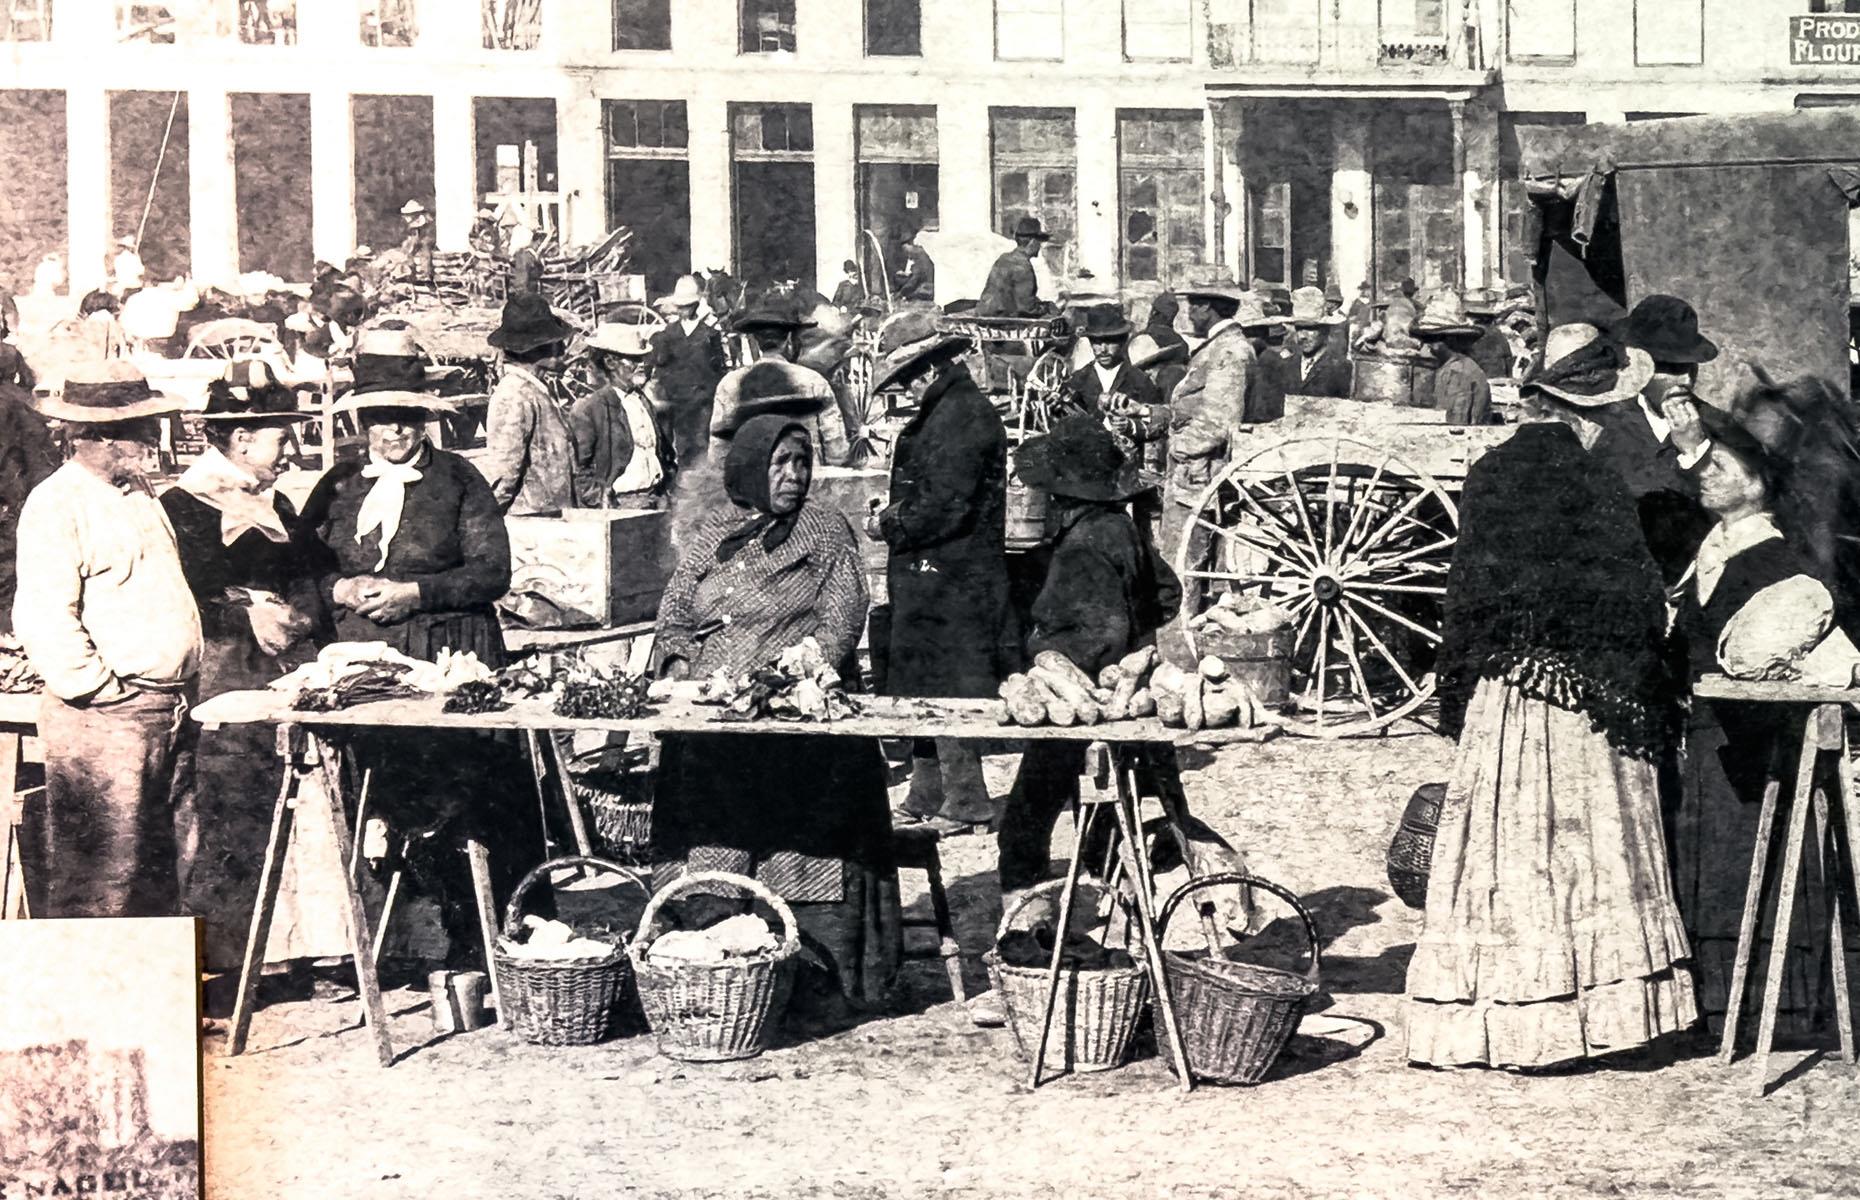 <p>In the late 1800s San Antonio’s plazas were famous for their ‘Chili Queens,’ local Mexican women doling out huge bowls of steaming chili con carne. The original inhabitants had always eaten a chili stew of sorts. But when the Spanish arrived with cattle, ‘chili’ had a ‘con carne’ (with meat) for the first time.</p>  <p>For real authentic chili con carne, head to the Four Brothers restaurant at the Omni La Mansion del Rio hotel. Made following a traditional recipe, it also comes with a huge serving of cornbread, baked in the shape of Texas.</p>